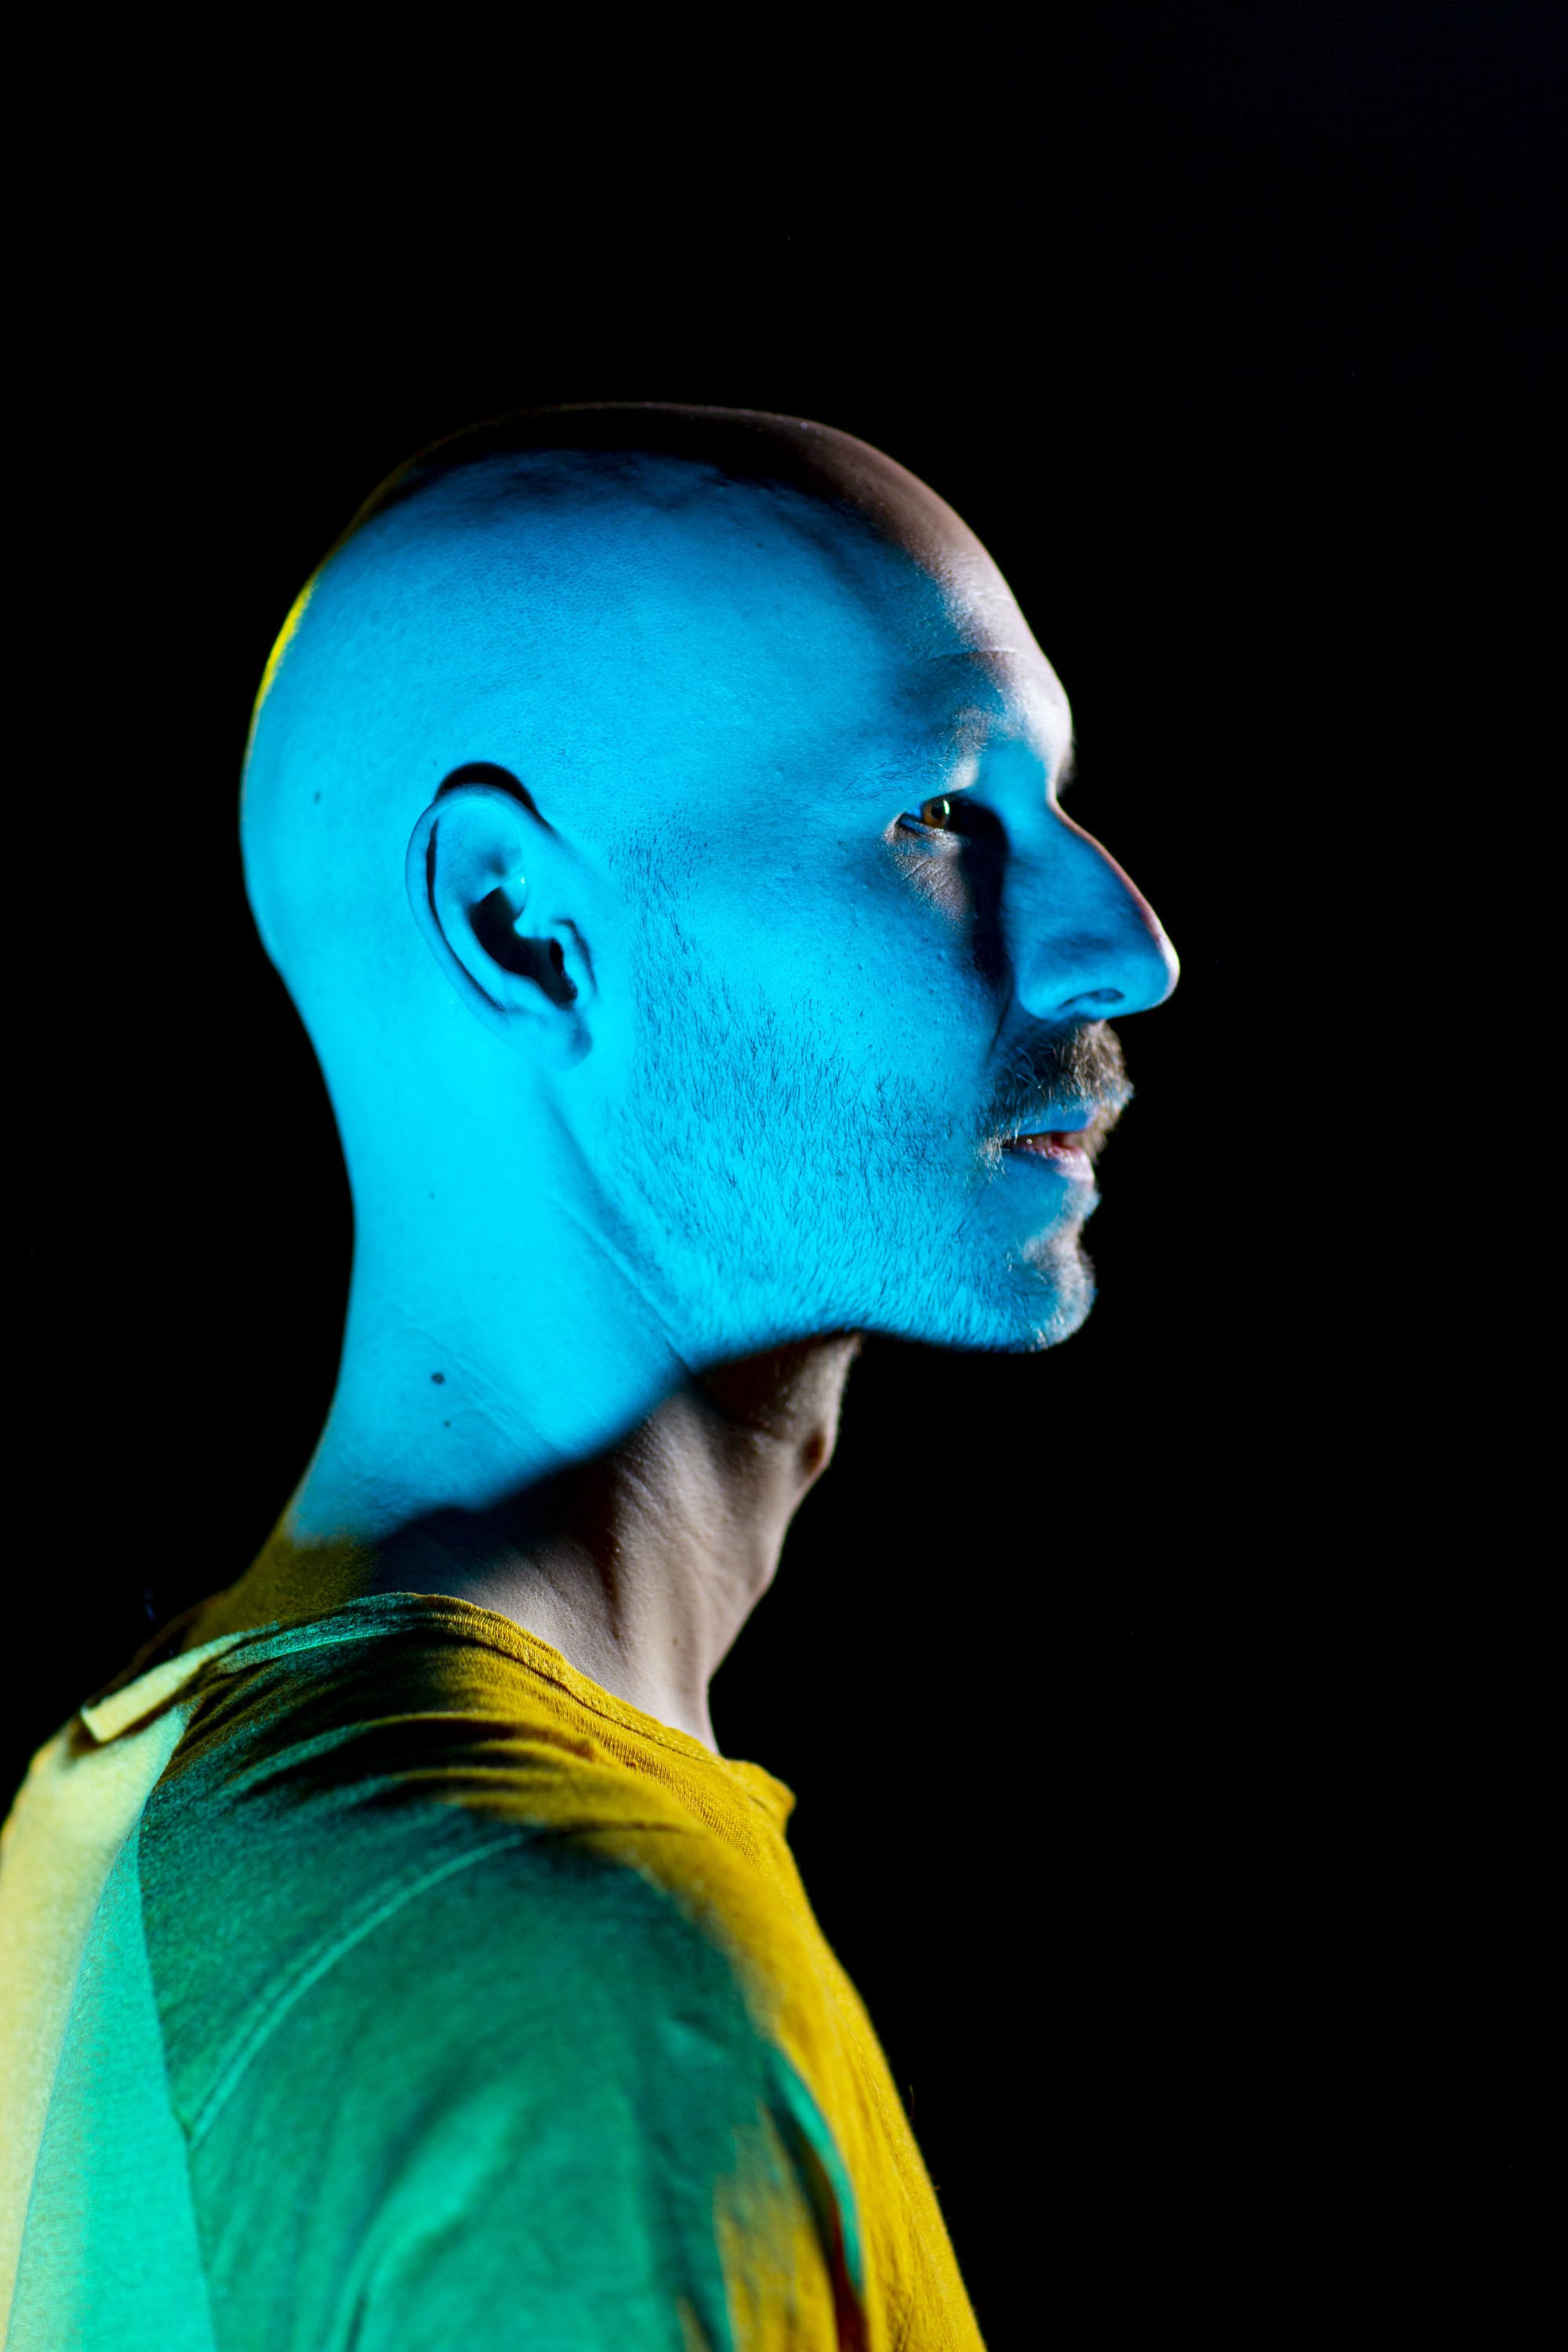 Close Studio Portrait of Timm Roller, wearing a yellow shirt in blue light.